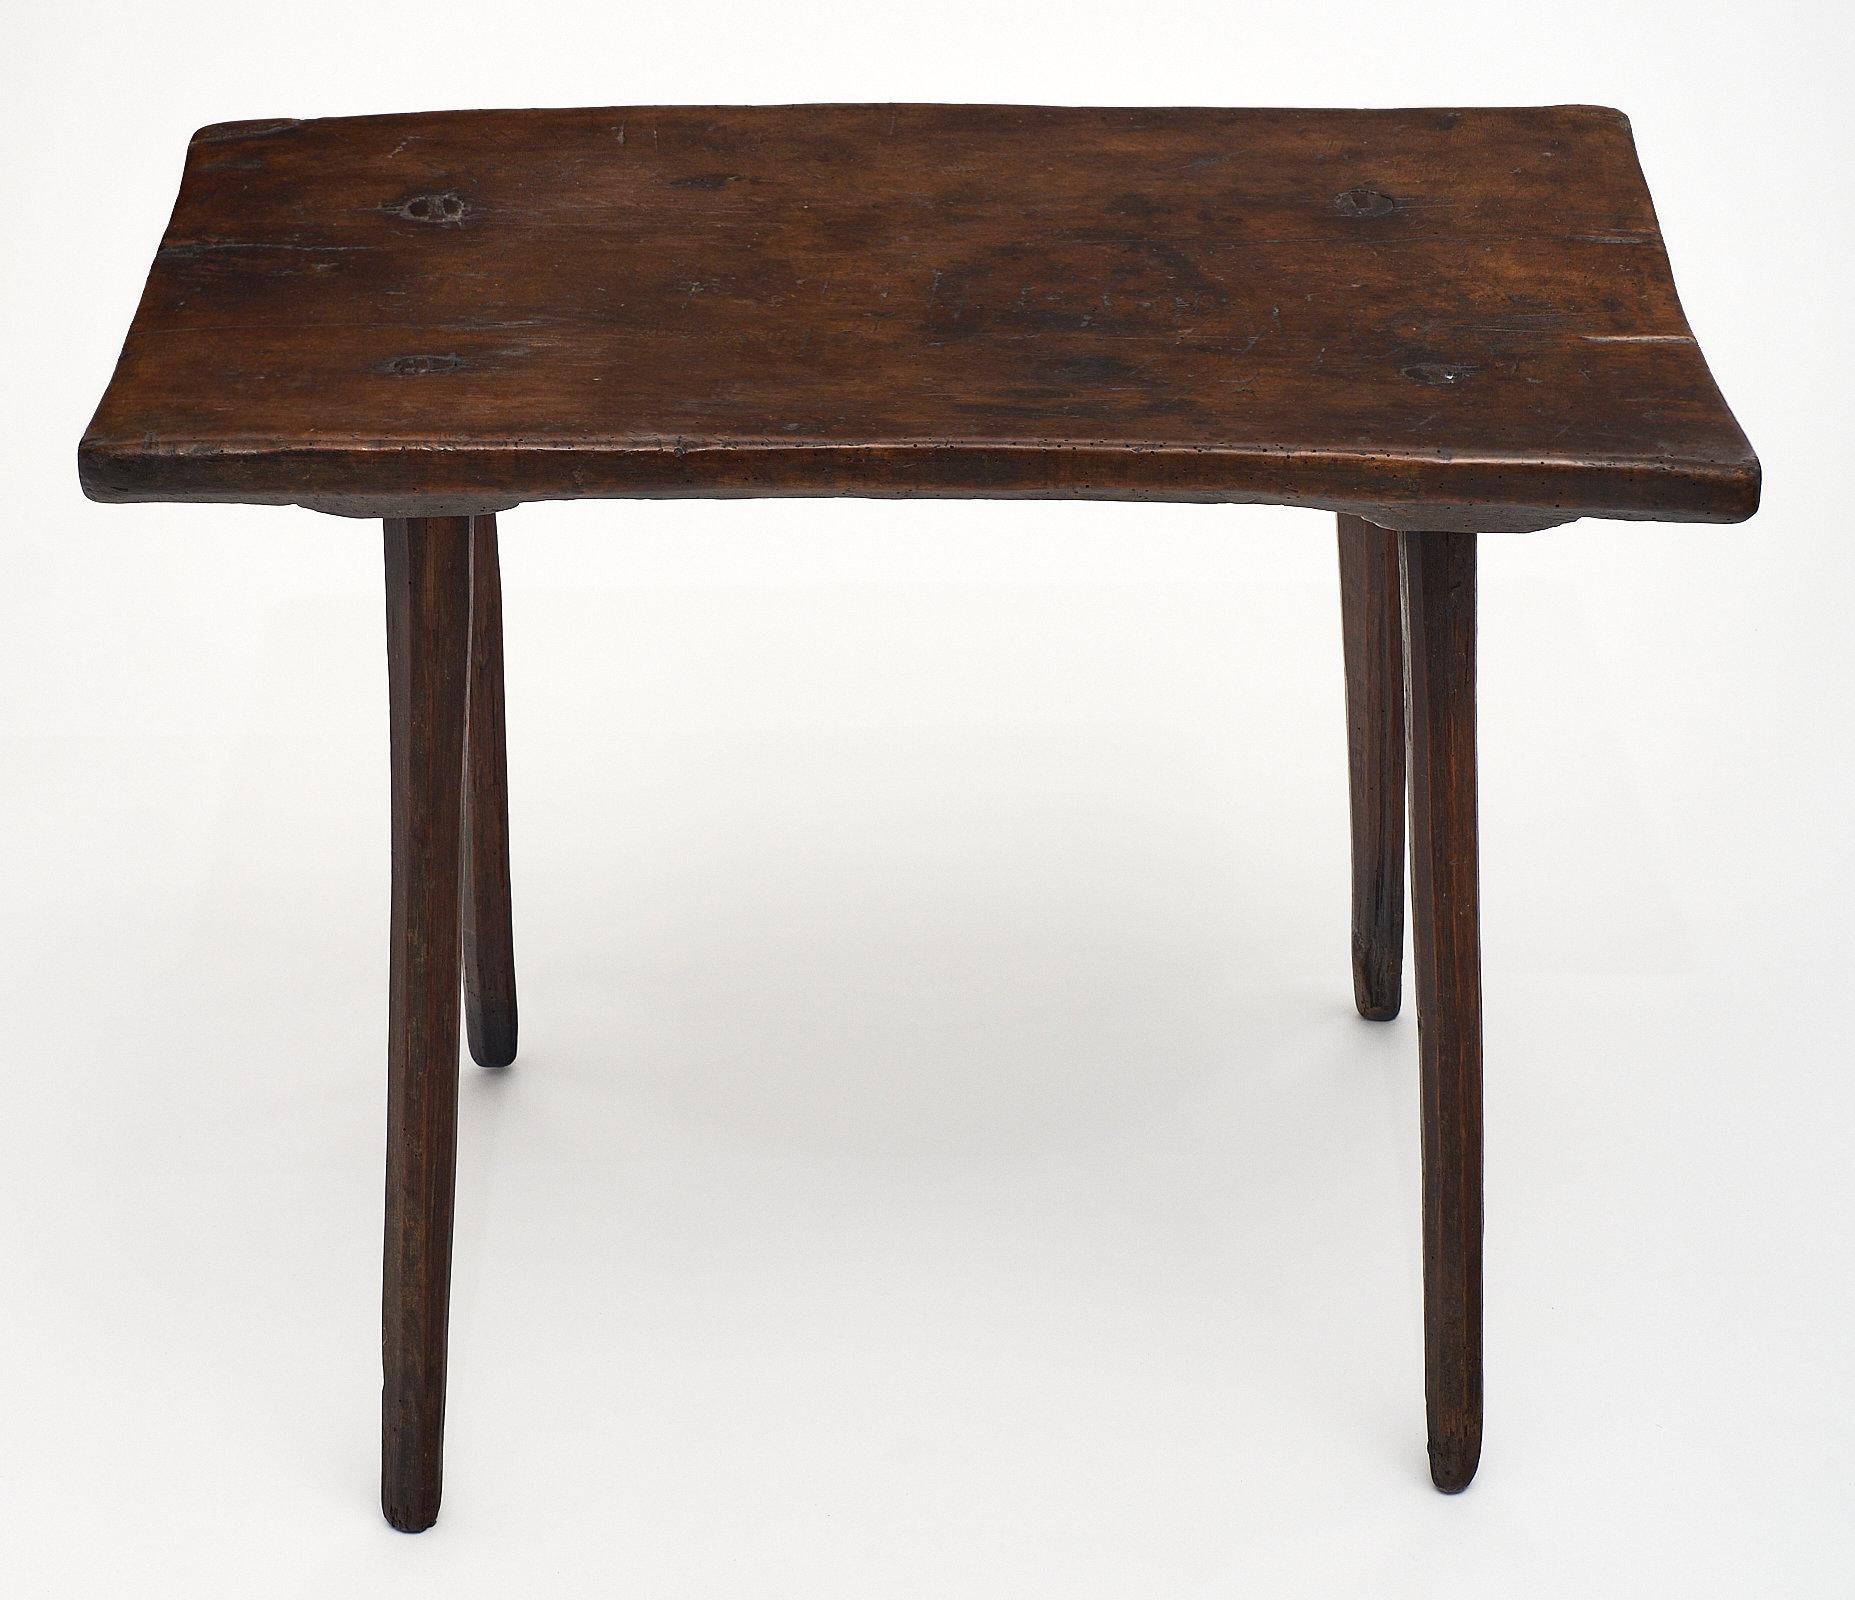 A single walnut plank Italian farm wood side table with four round, hand-carved legs pegged into the top. This primitive table has a warmth and authenticity to the form and material. We loved the feel of this Tuscan farm piece, which could be used